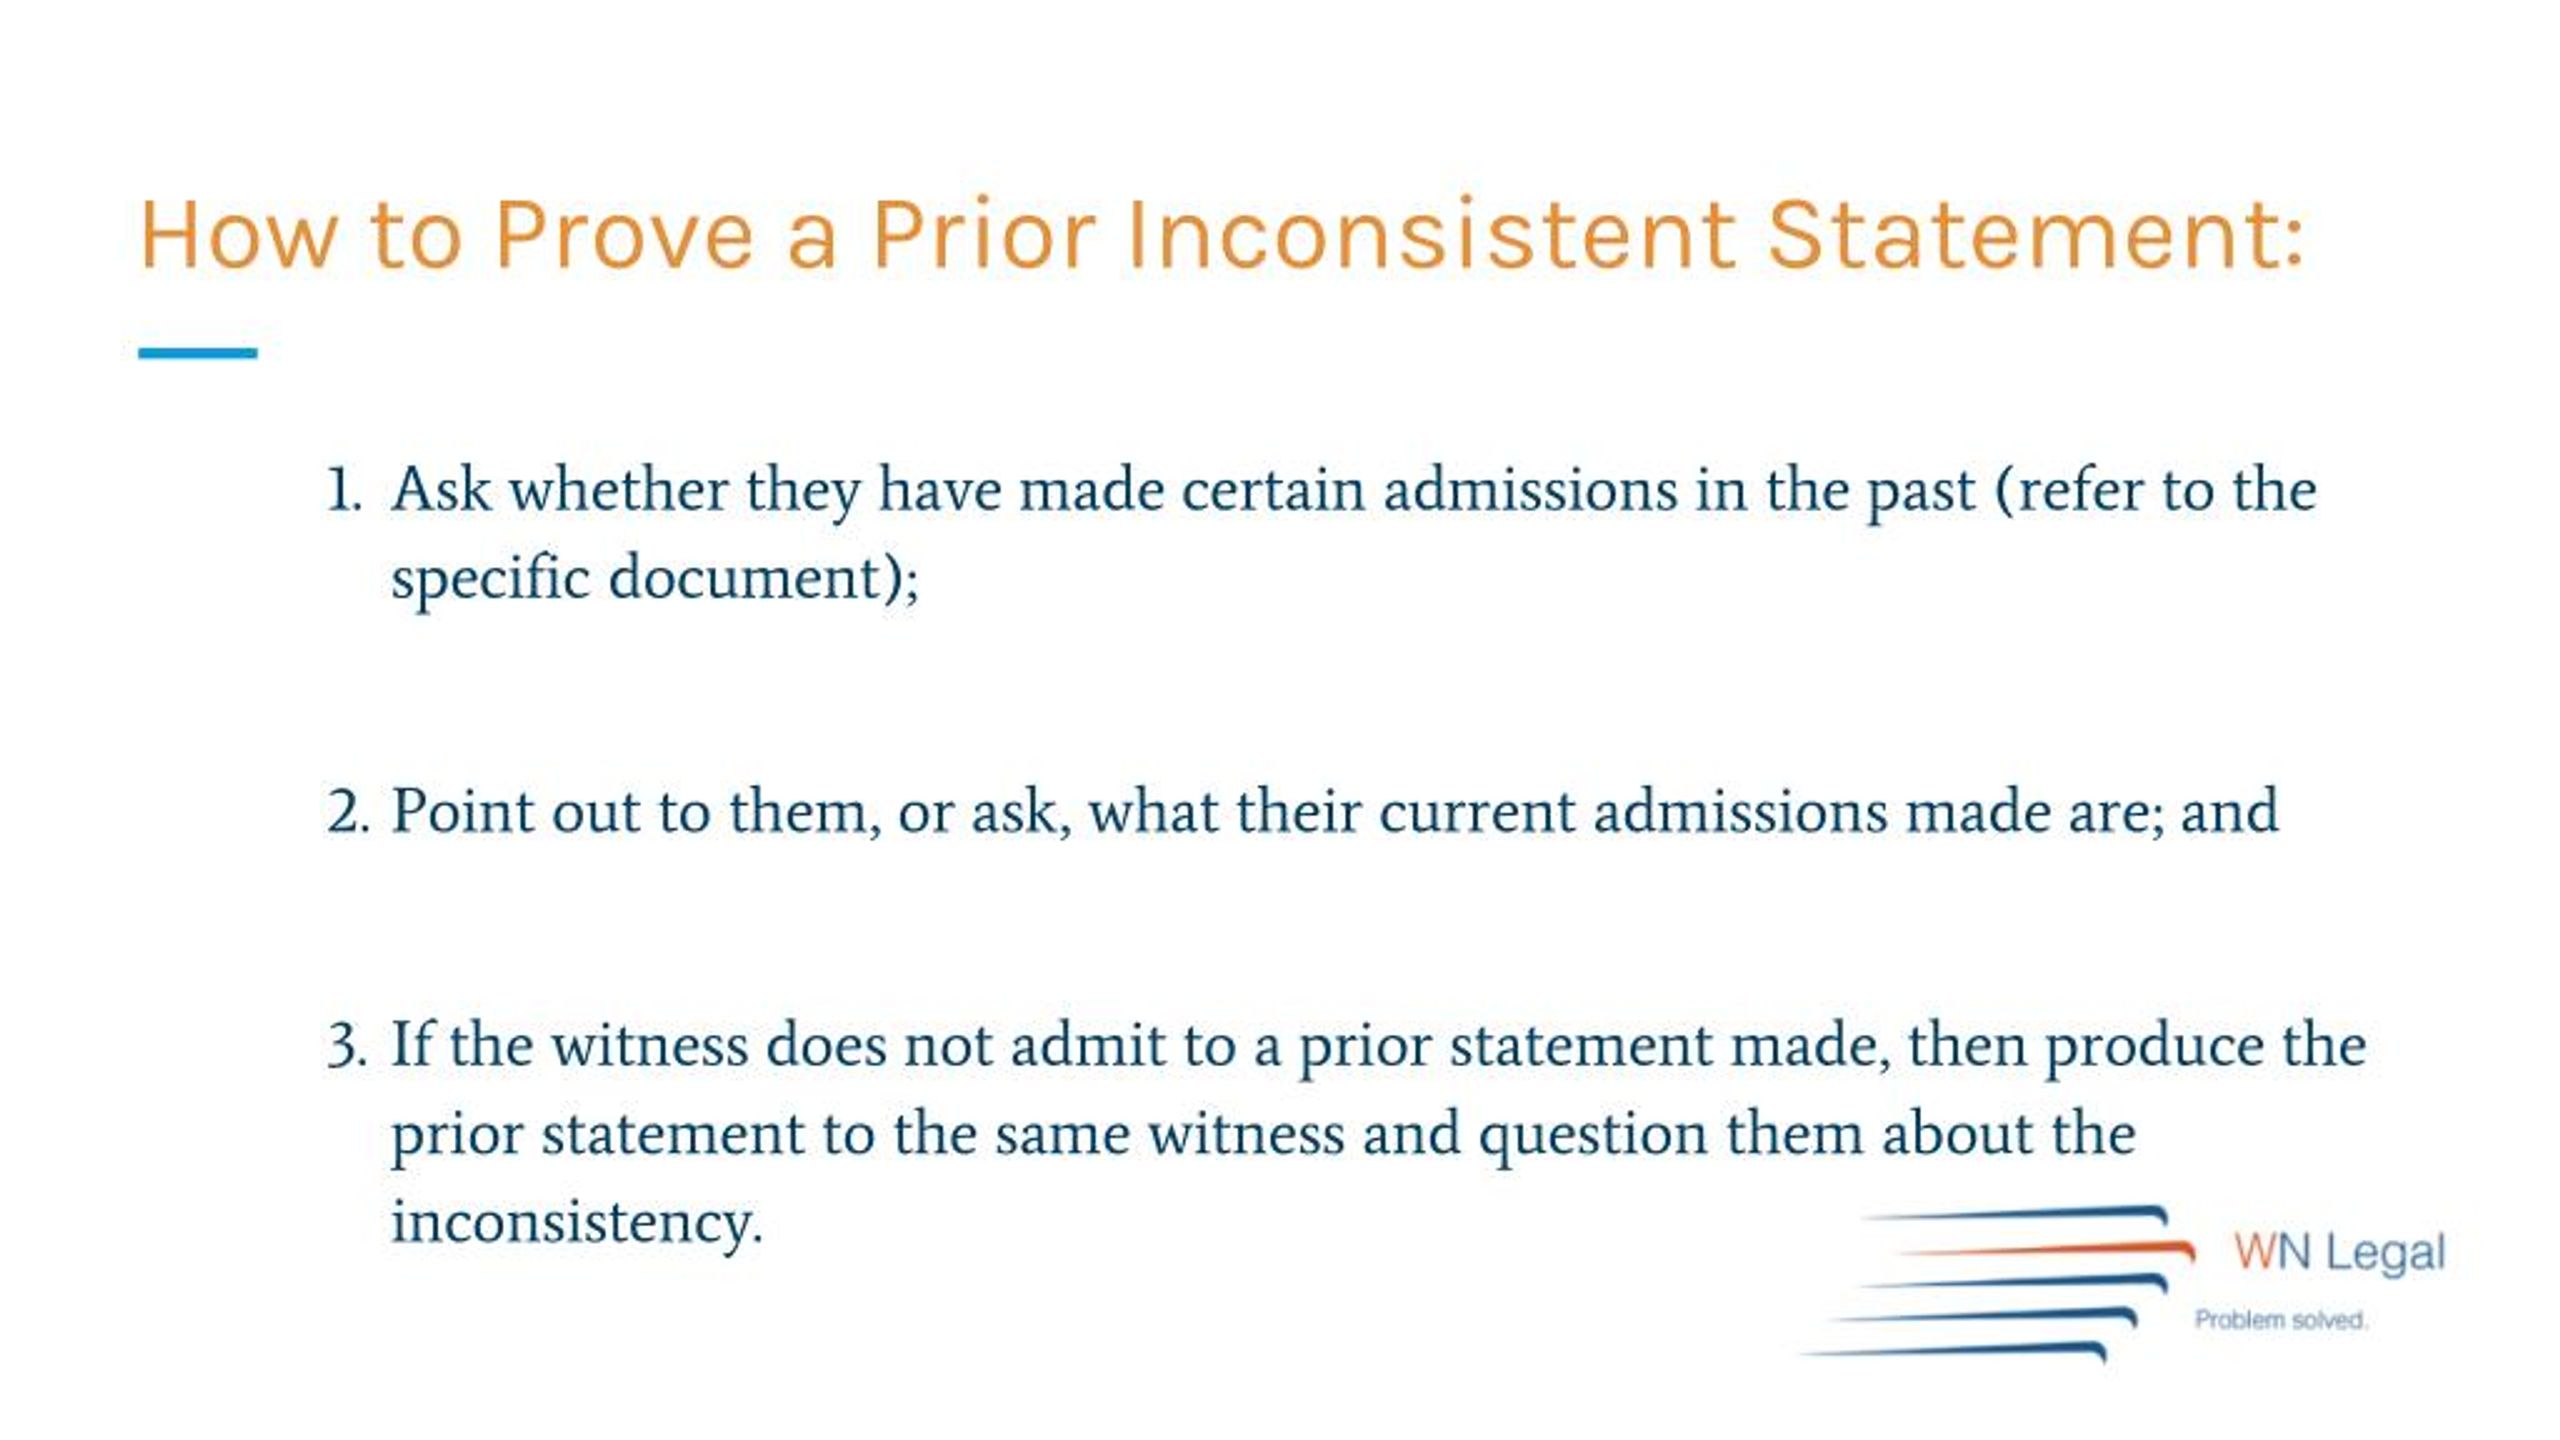 PPT - Prior Inconsistent Statement- What to Do if Someone is Lying - WN ...